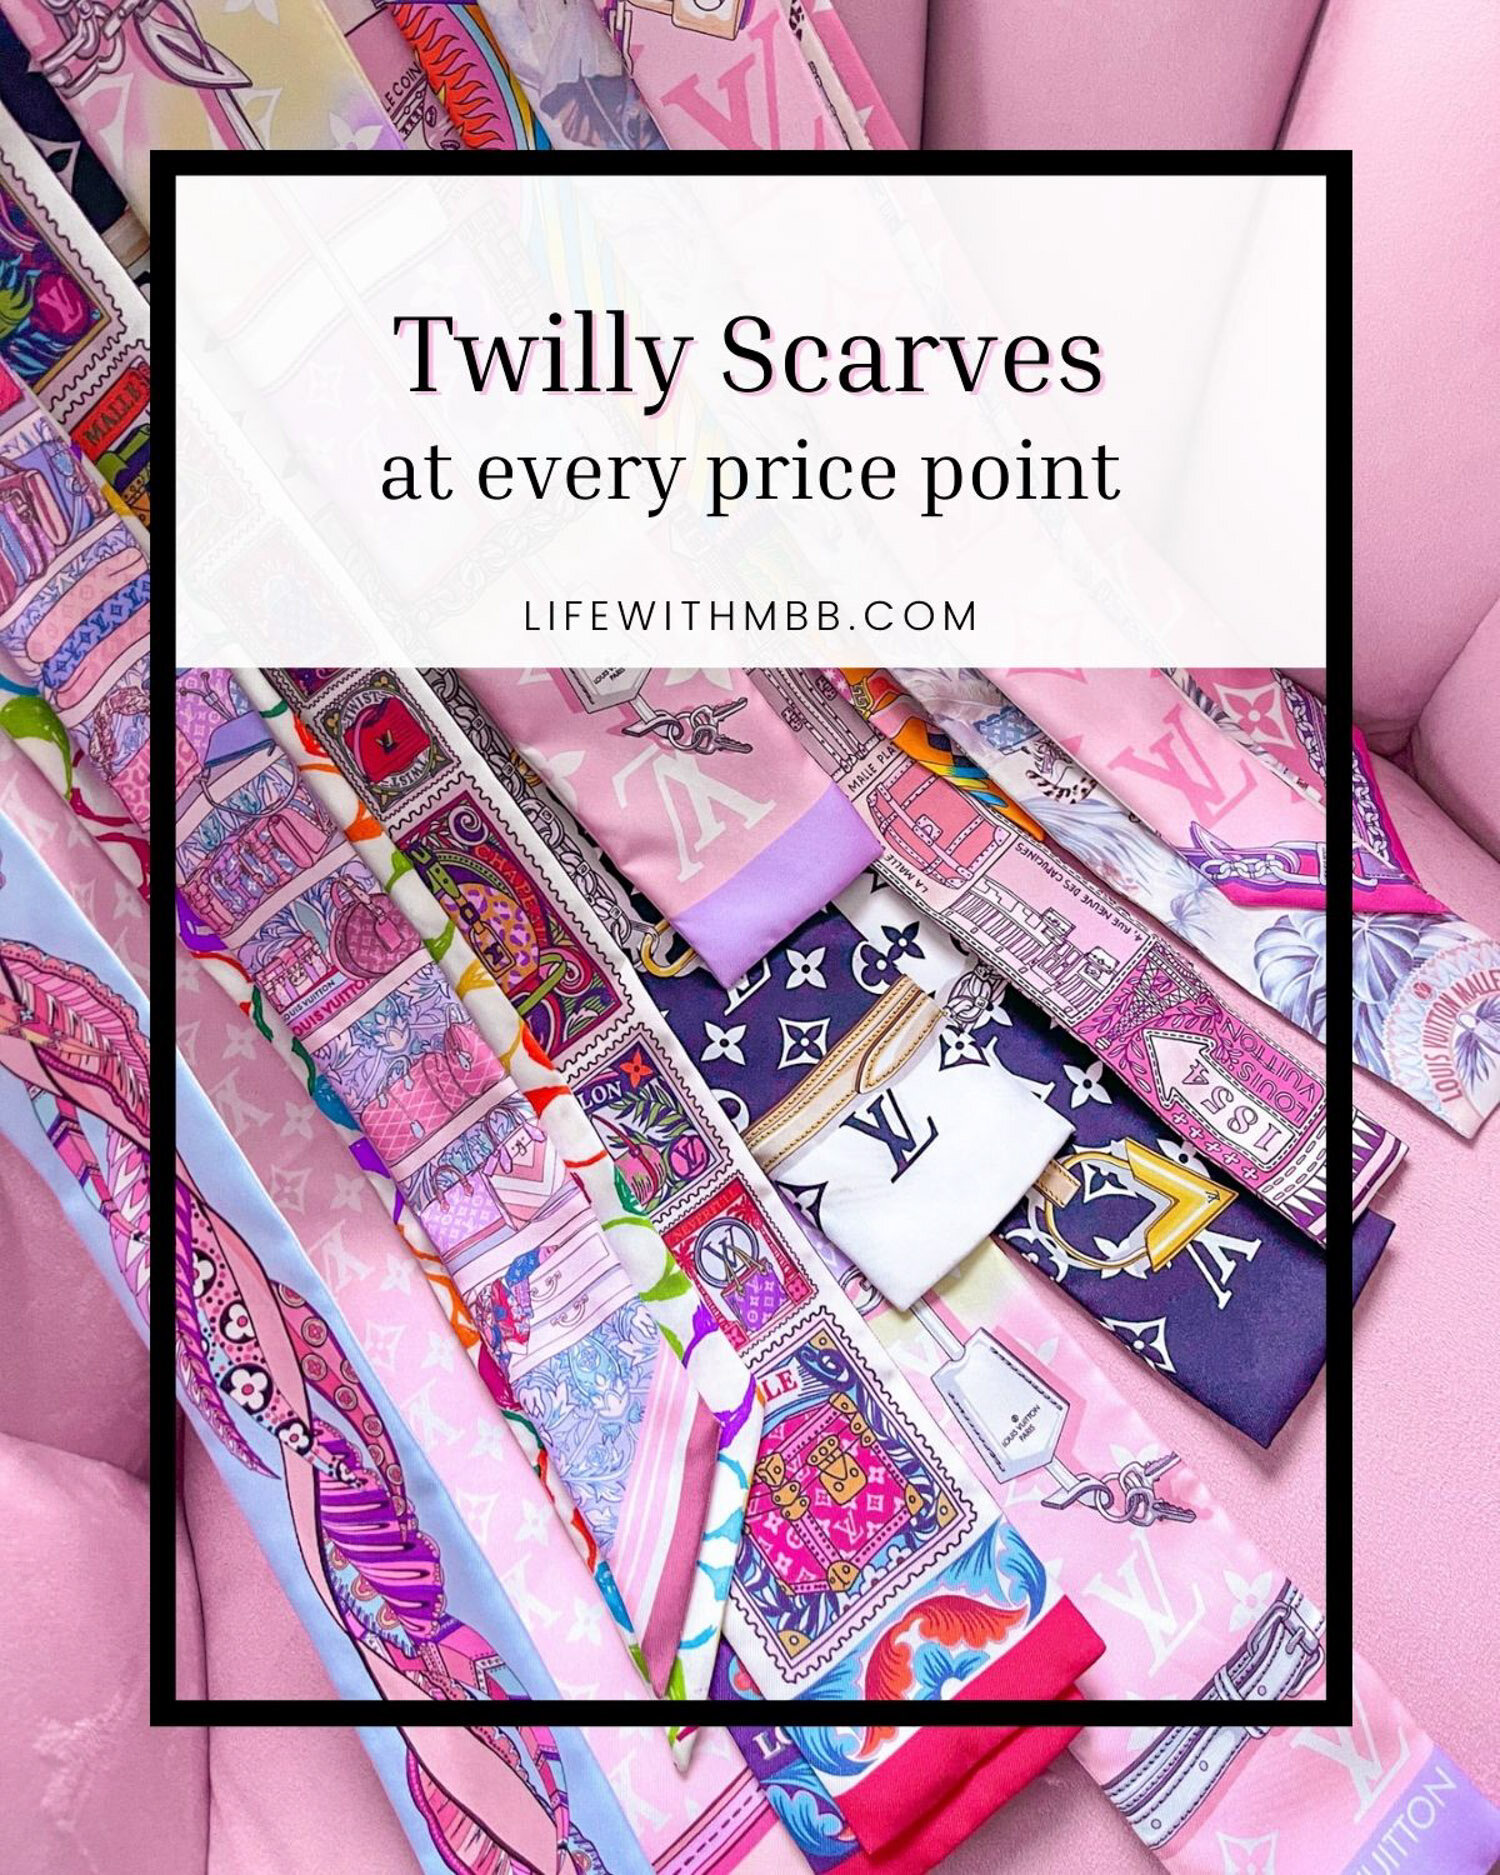 7 Ways to Tie a Twilly Scarf on Your Hermès Bag – Roses, Ribbons, and More!  